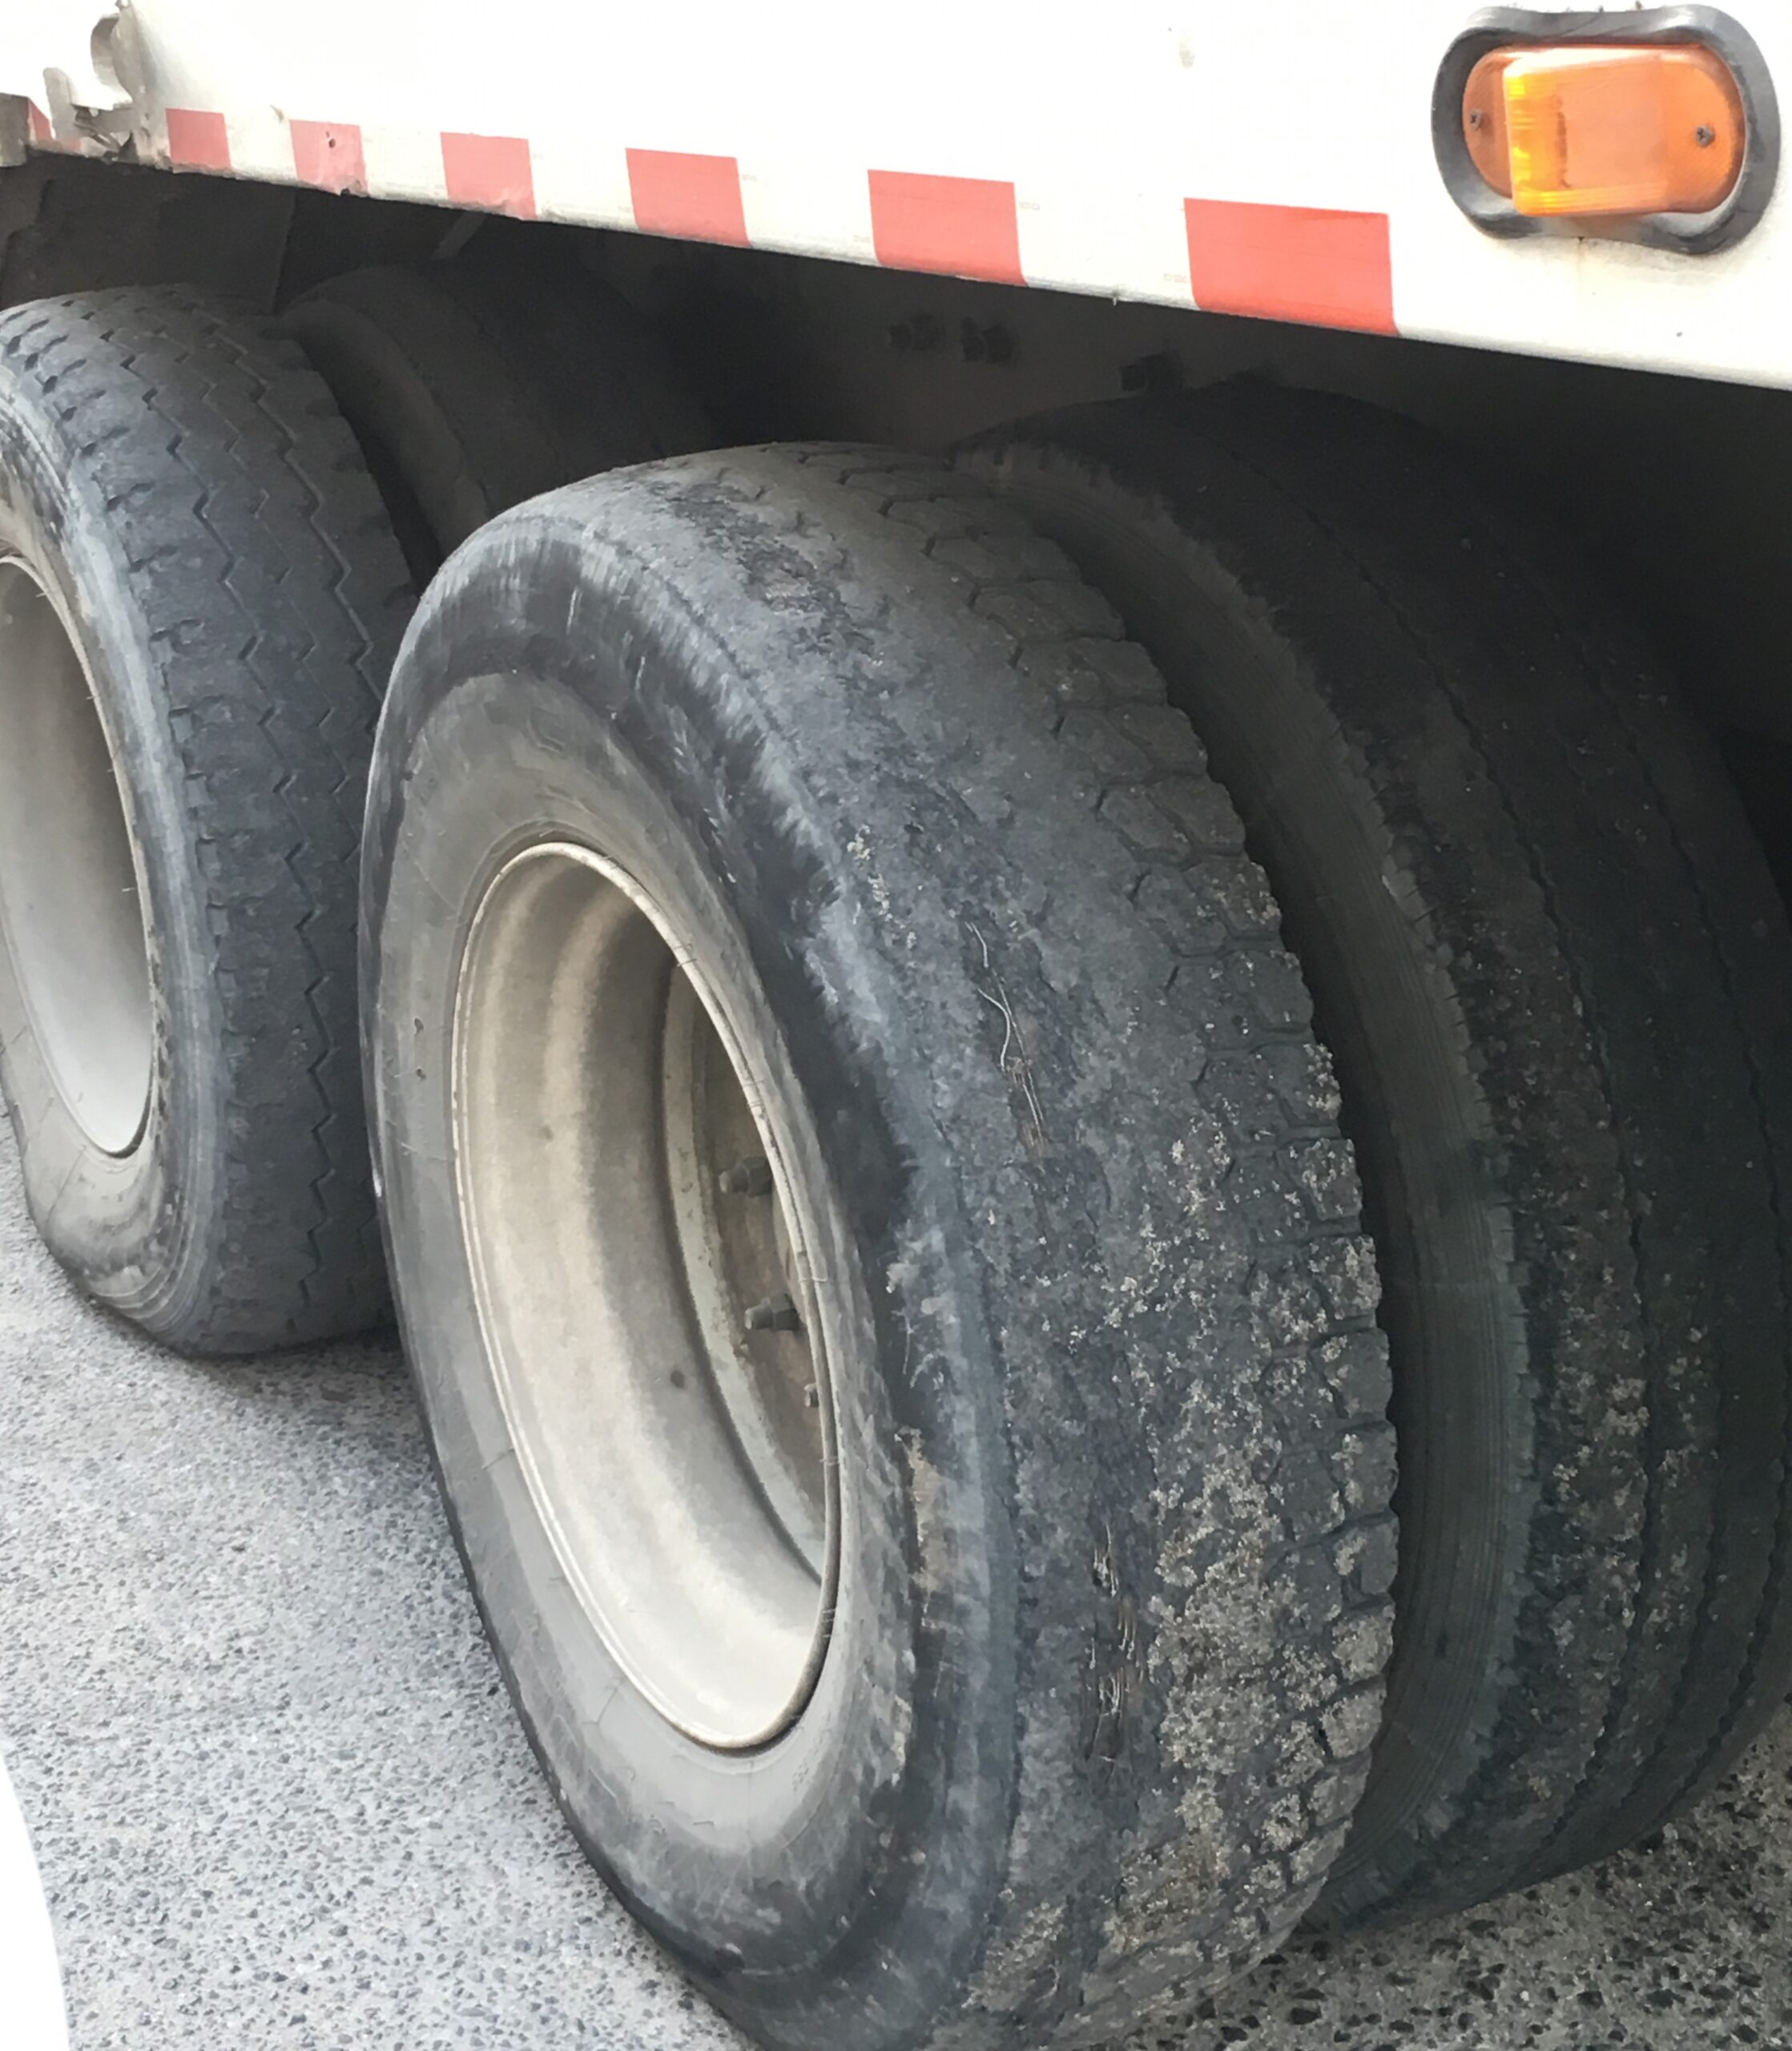 Close-up of truck's dual rear wheels.